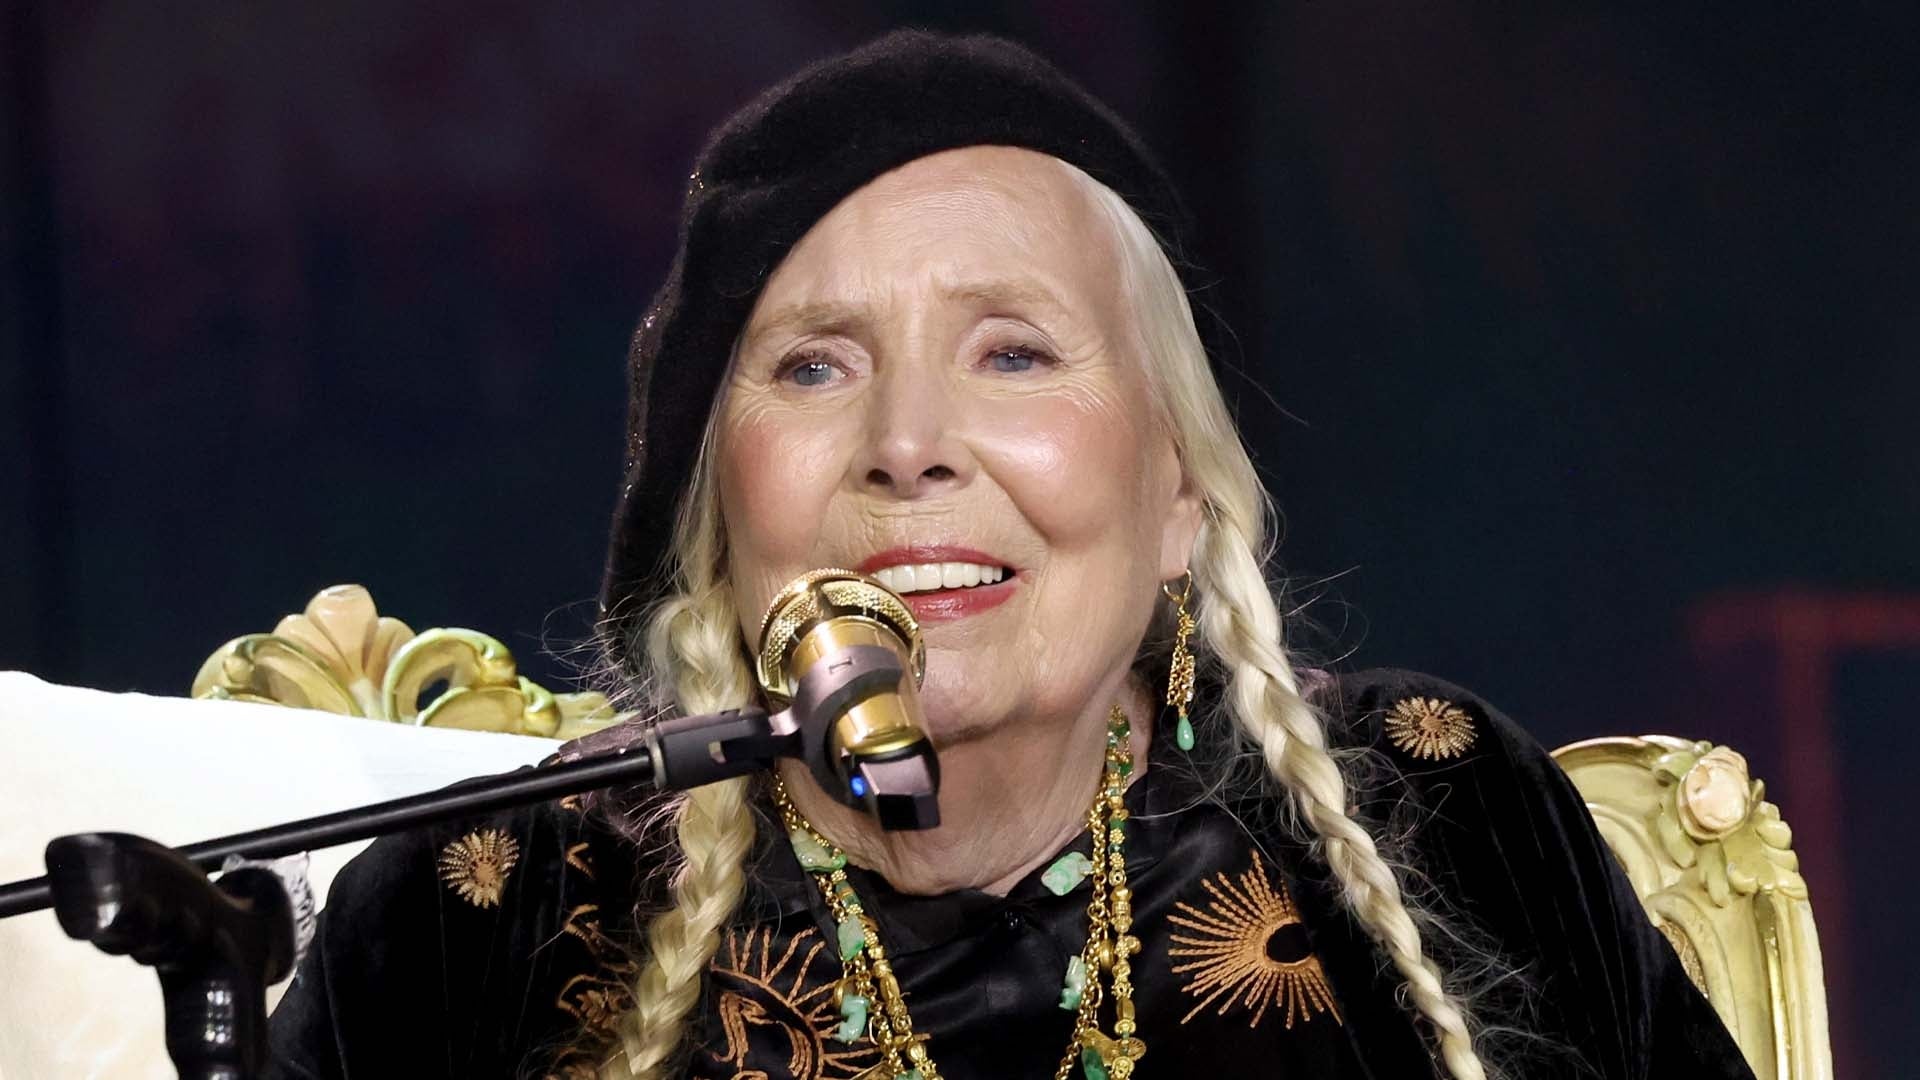 Joni Mitchell Makes Her GRAMMYs Performance Debut at 80